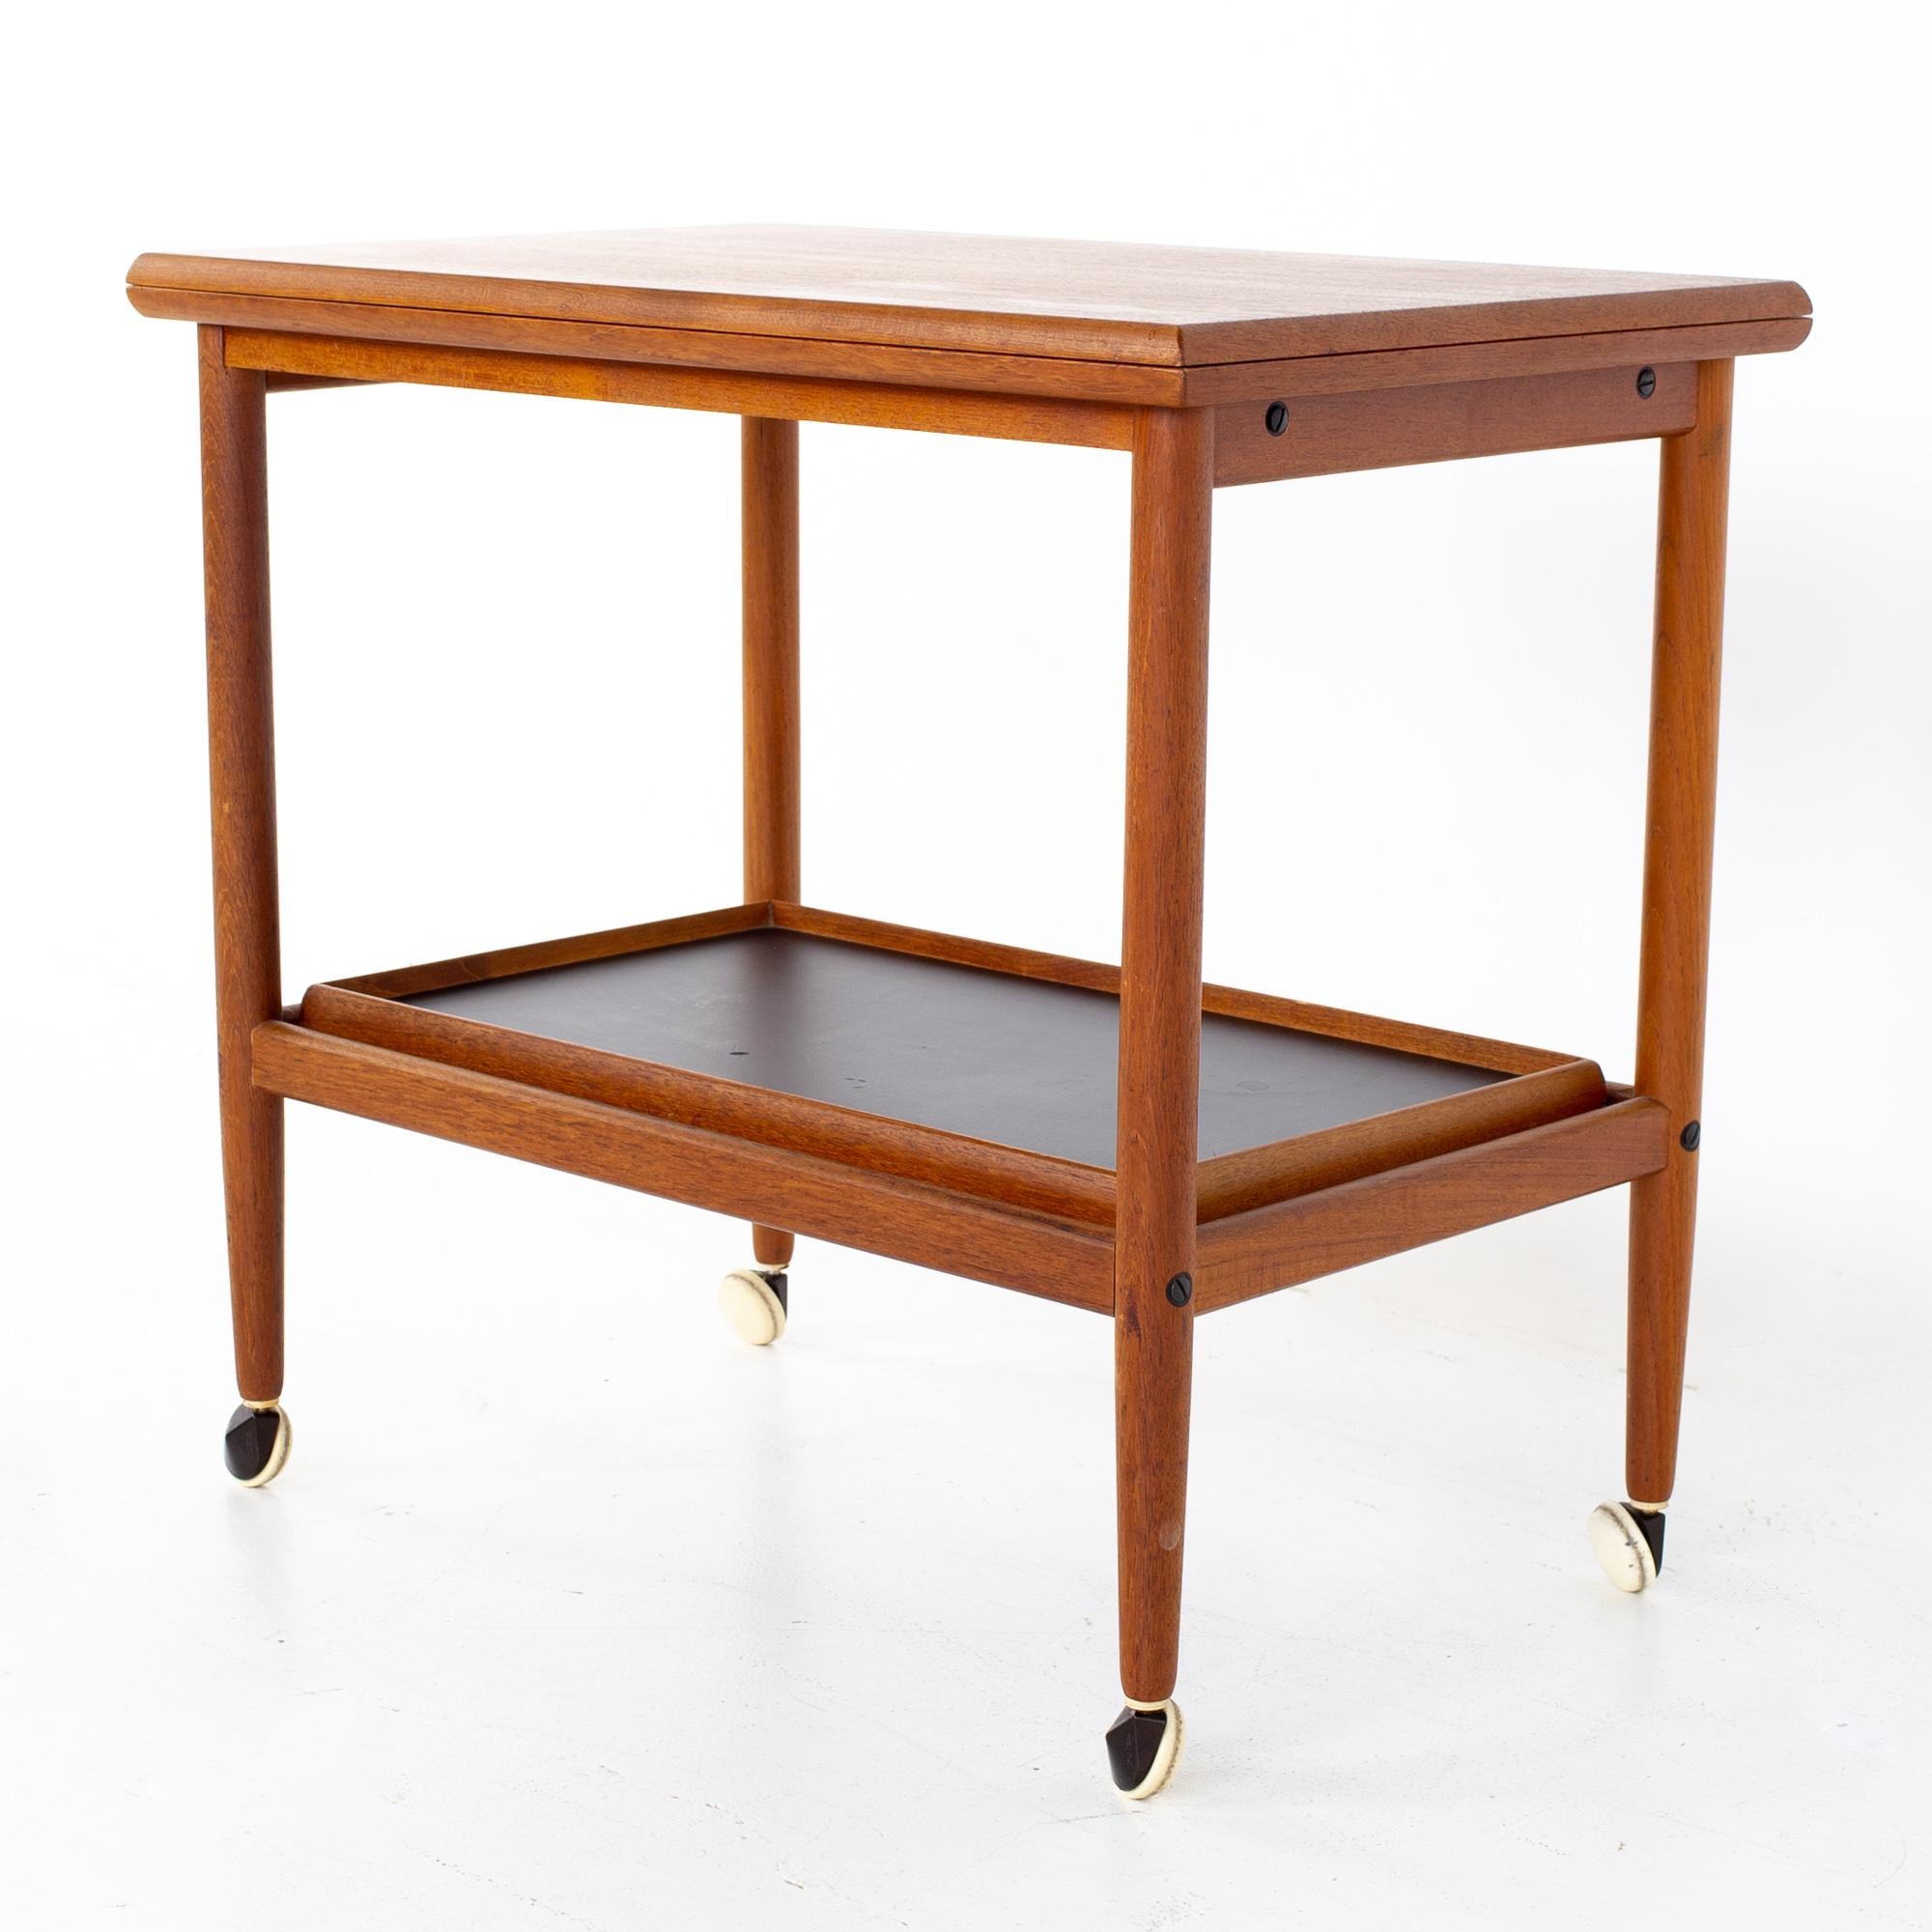 Grete Jalk mid century Danish teak bar cart
When folded, the bar cart measures: 27.5 wide x 17.25 deep x 25 inches high. When expanded, the bar cart measures: 35 wide x 27.75 deep x 25 inches high

All pieces of furniture can be had in what we